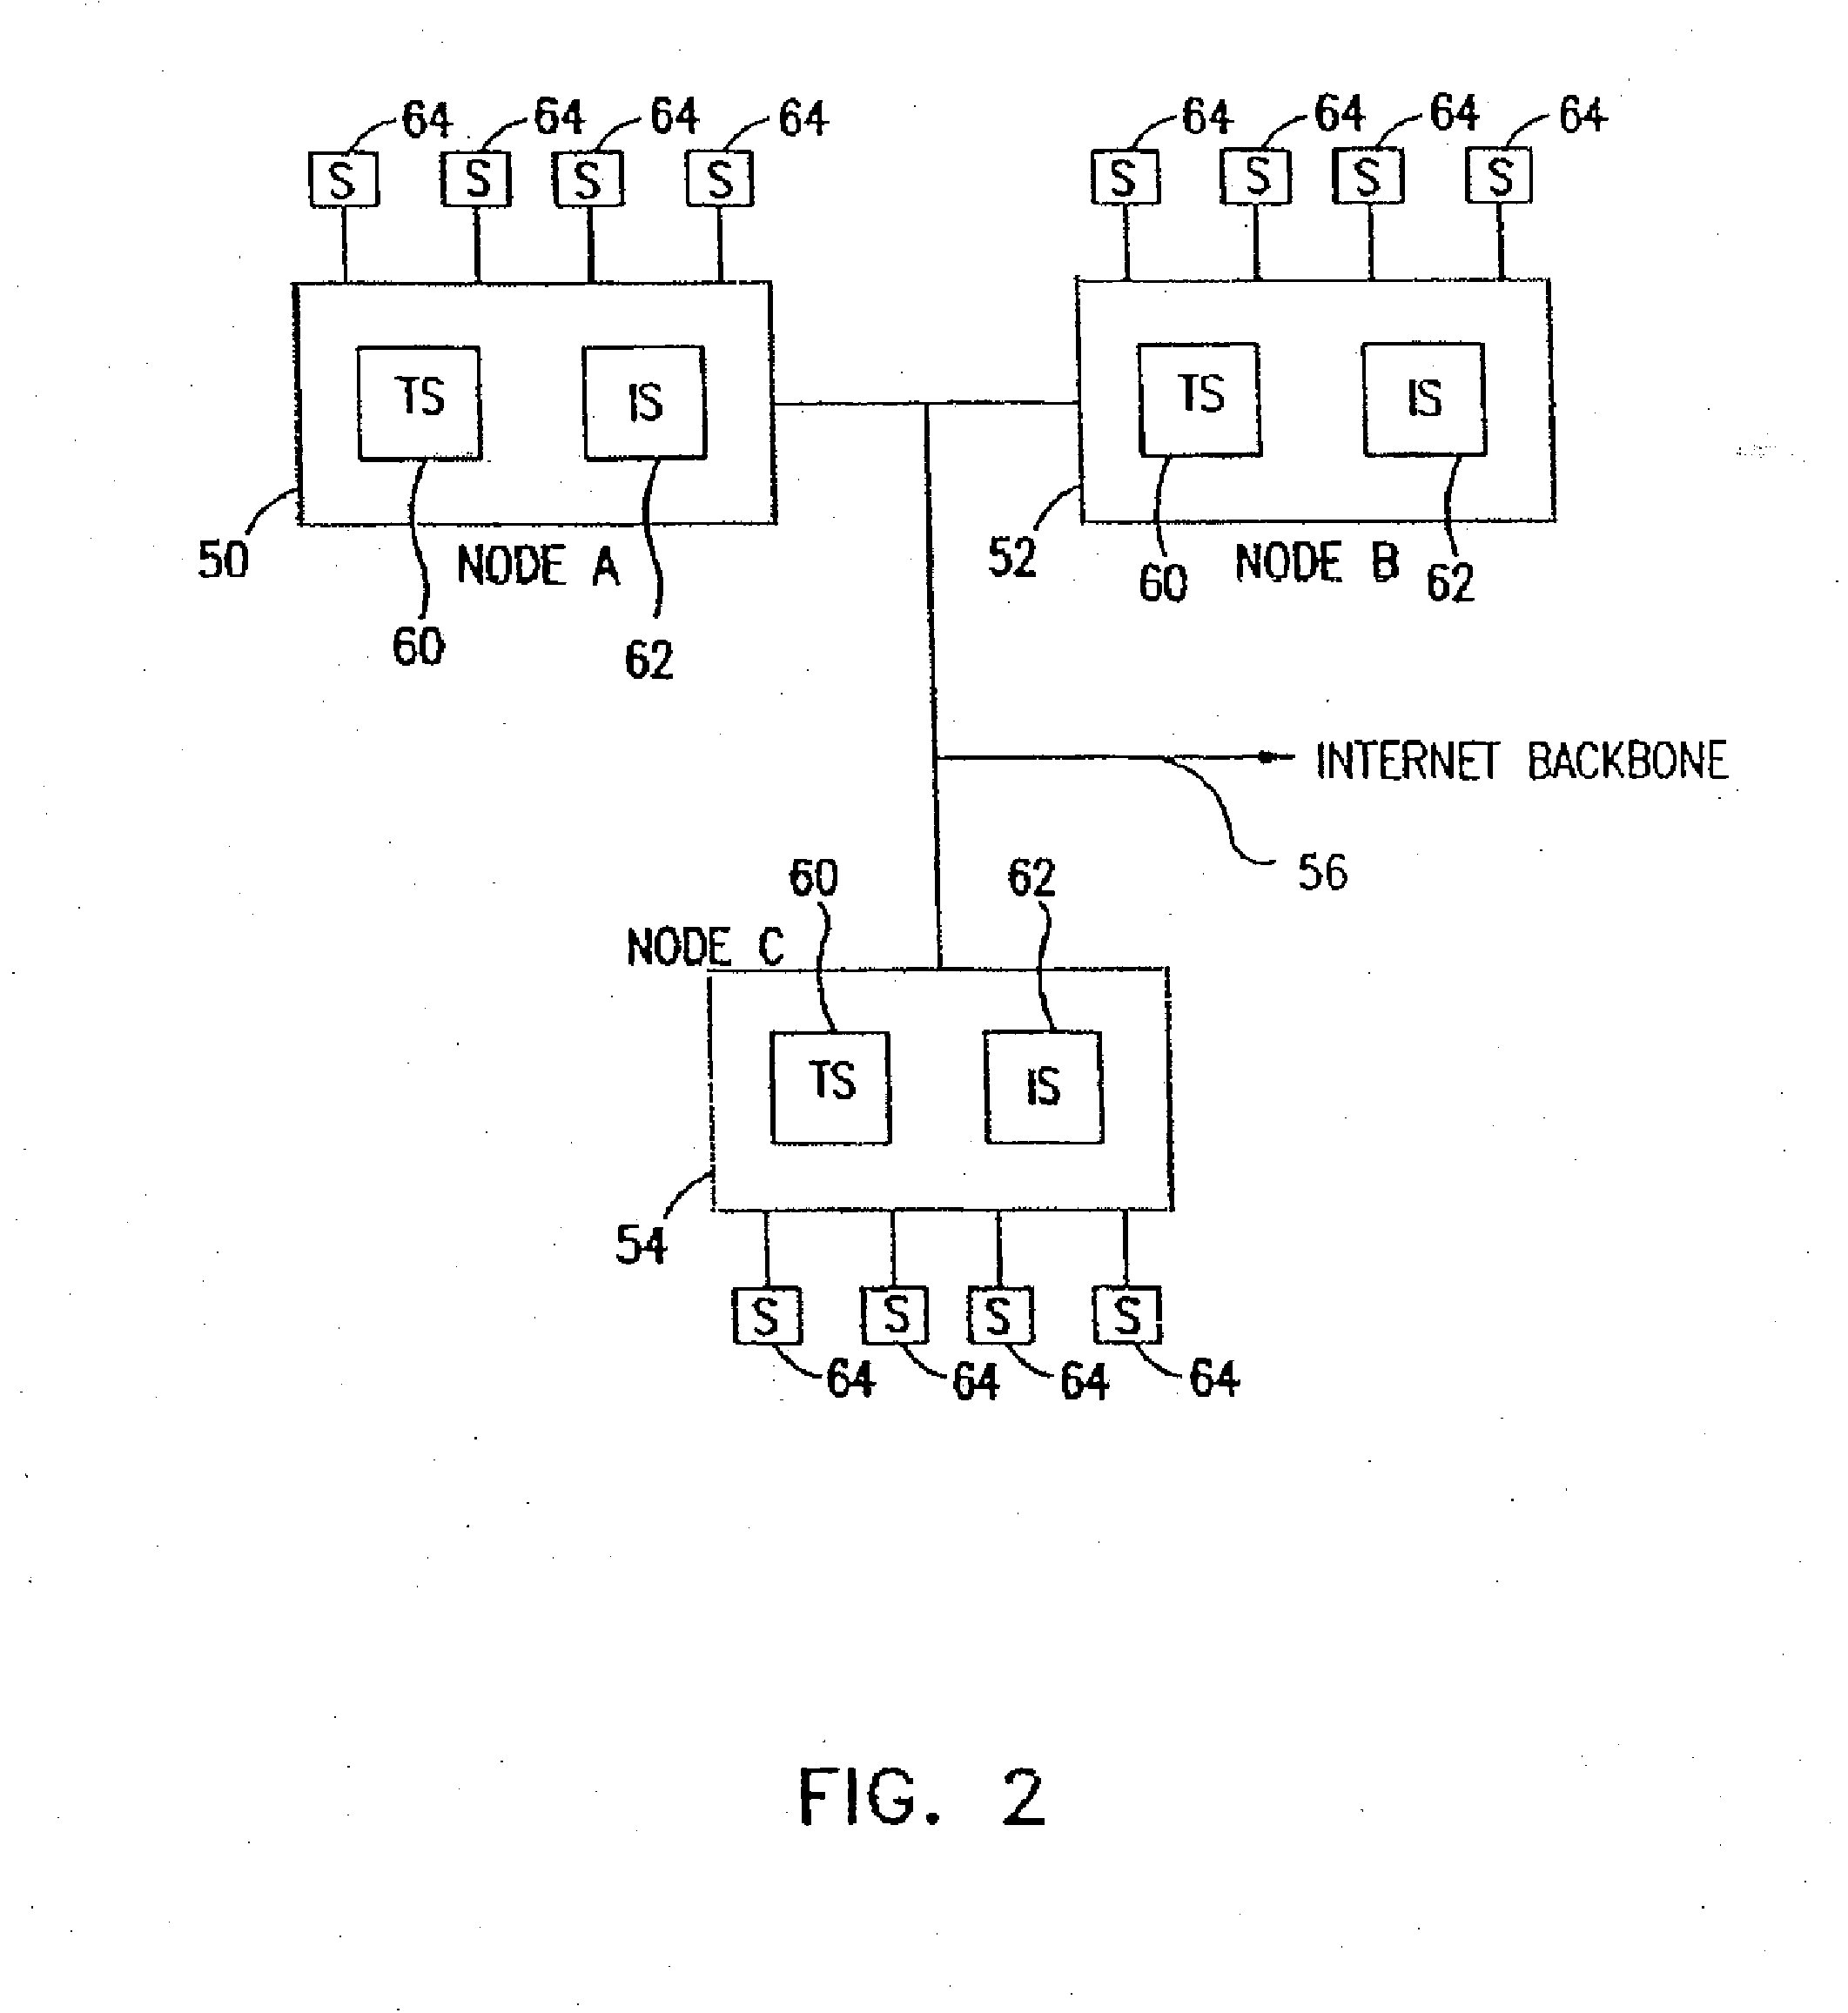 System and Method for Managing Multimedia Communications Across Convergent Networks